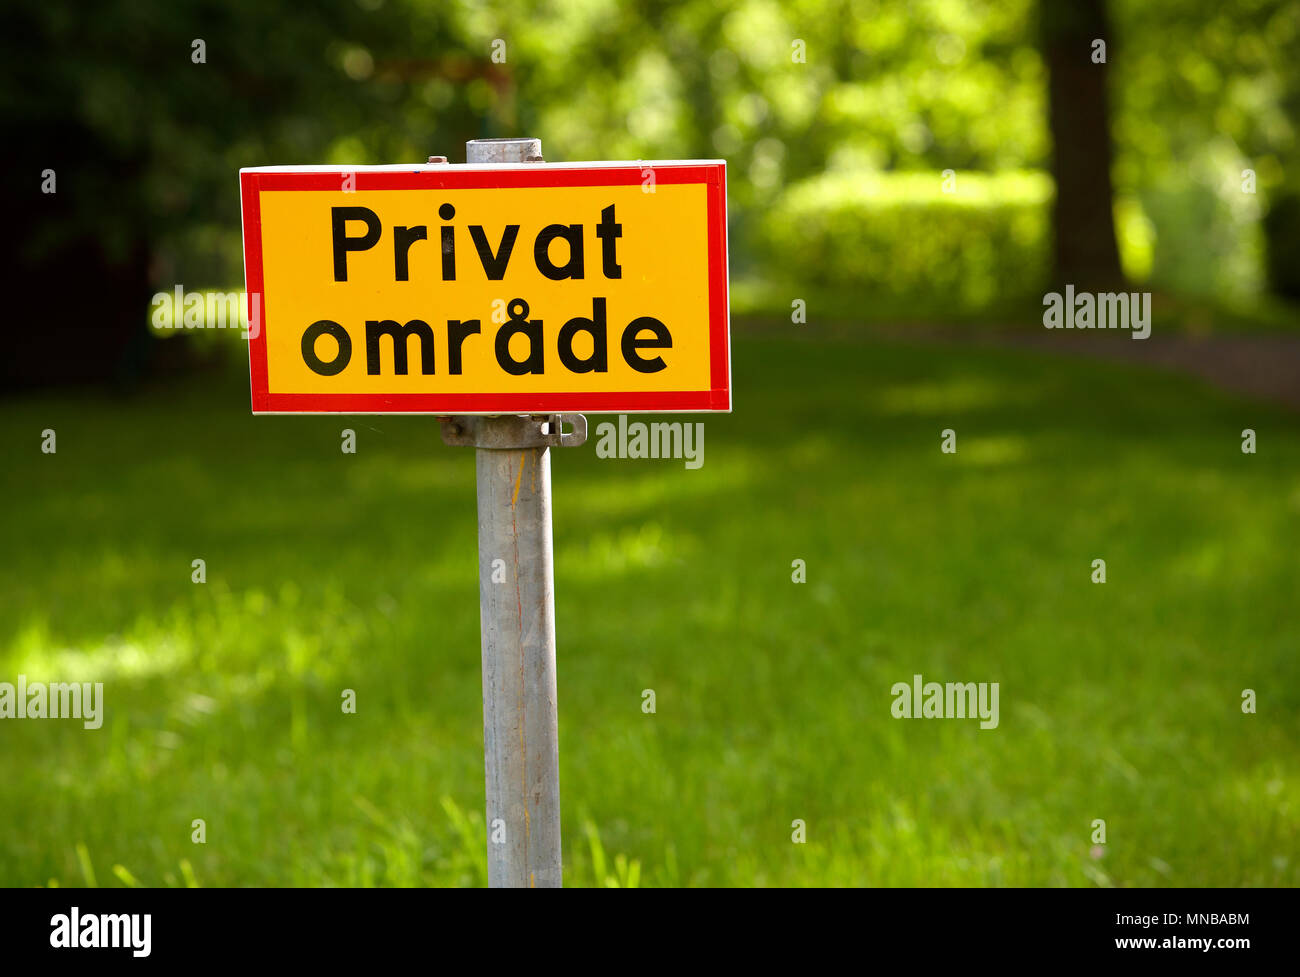 Yellow sign with red frame and text in Swedish specify Private Area. Stock Photo